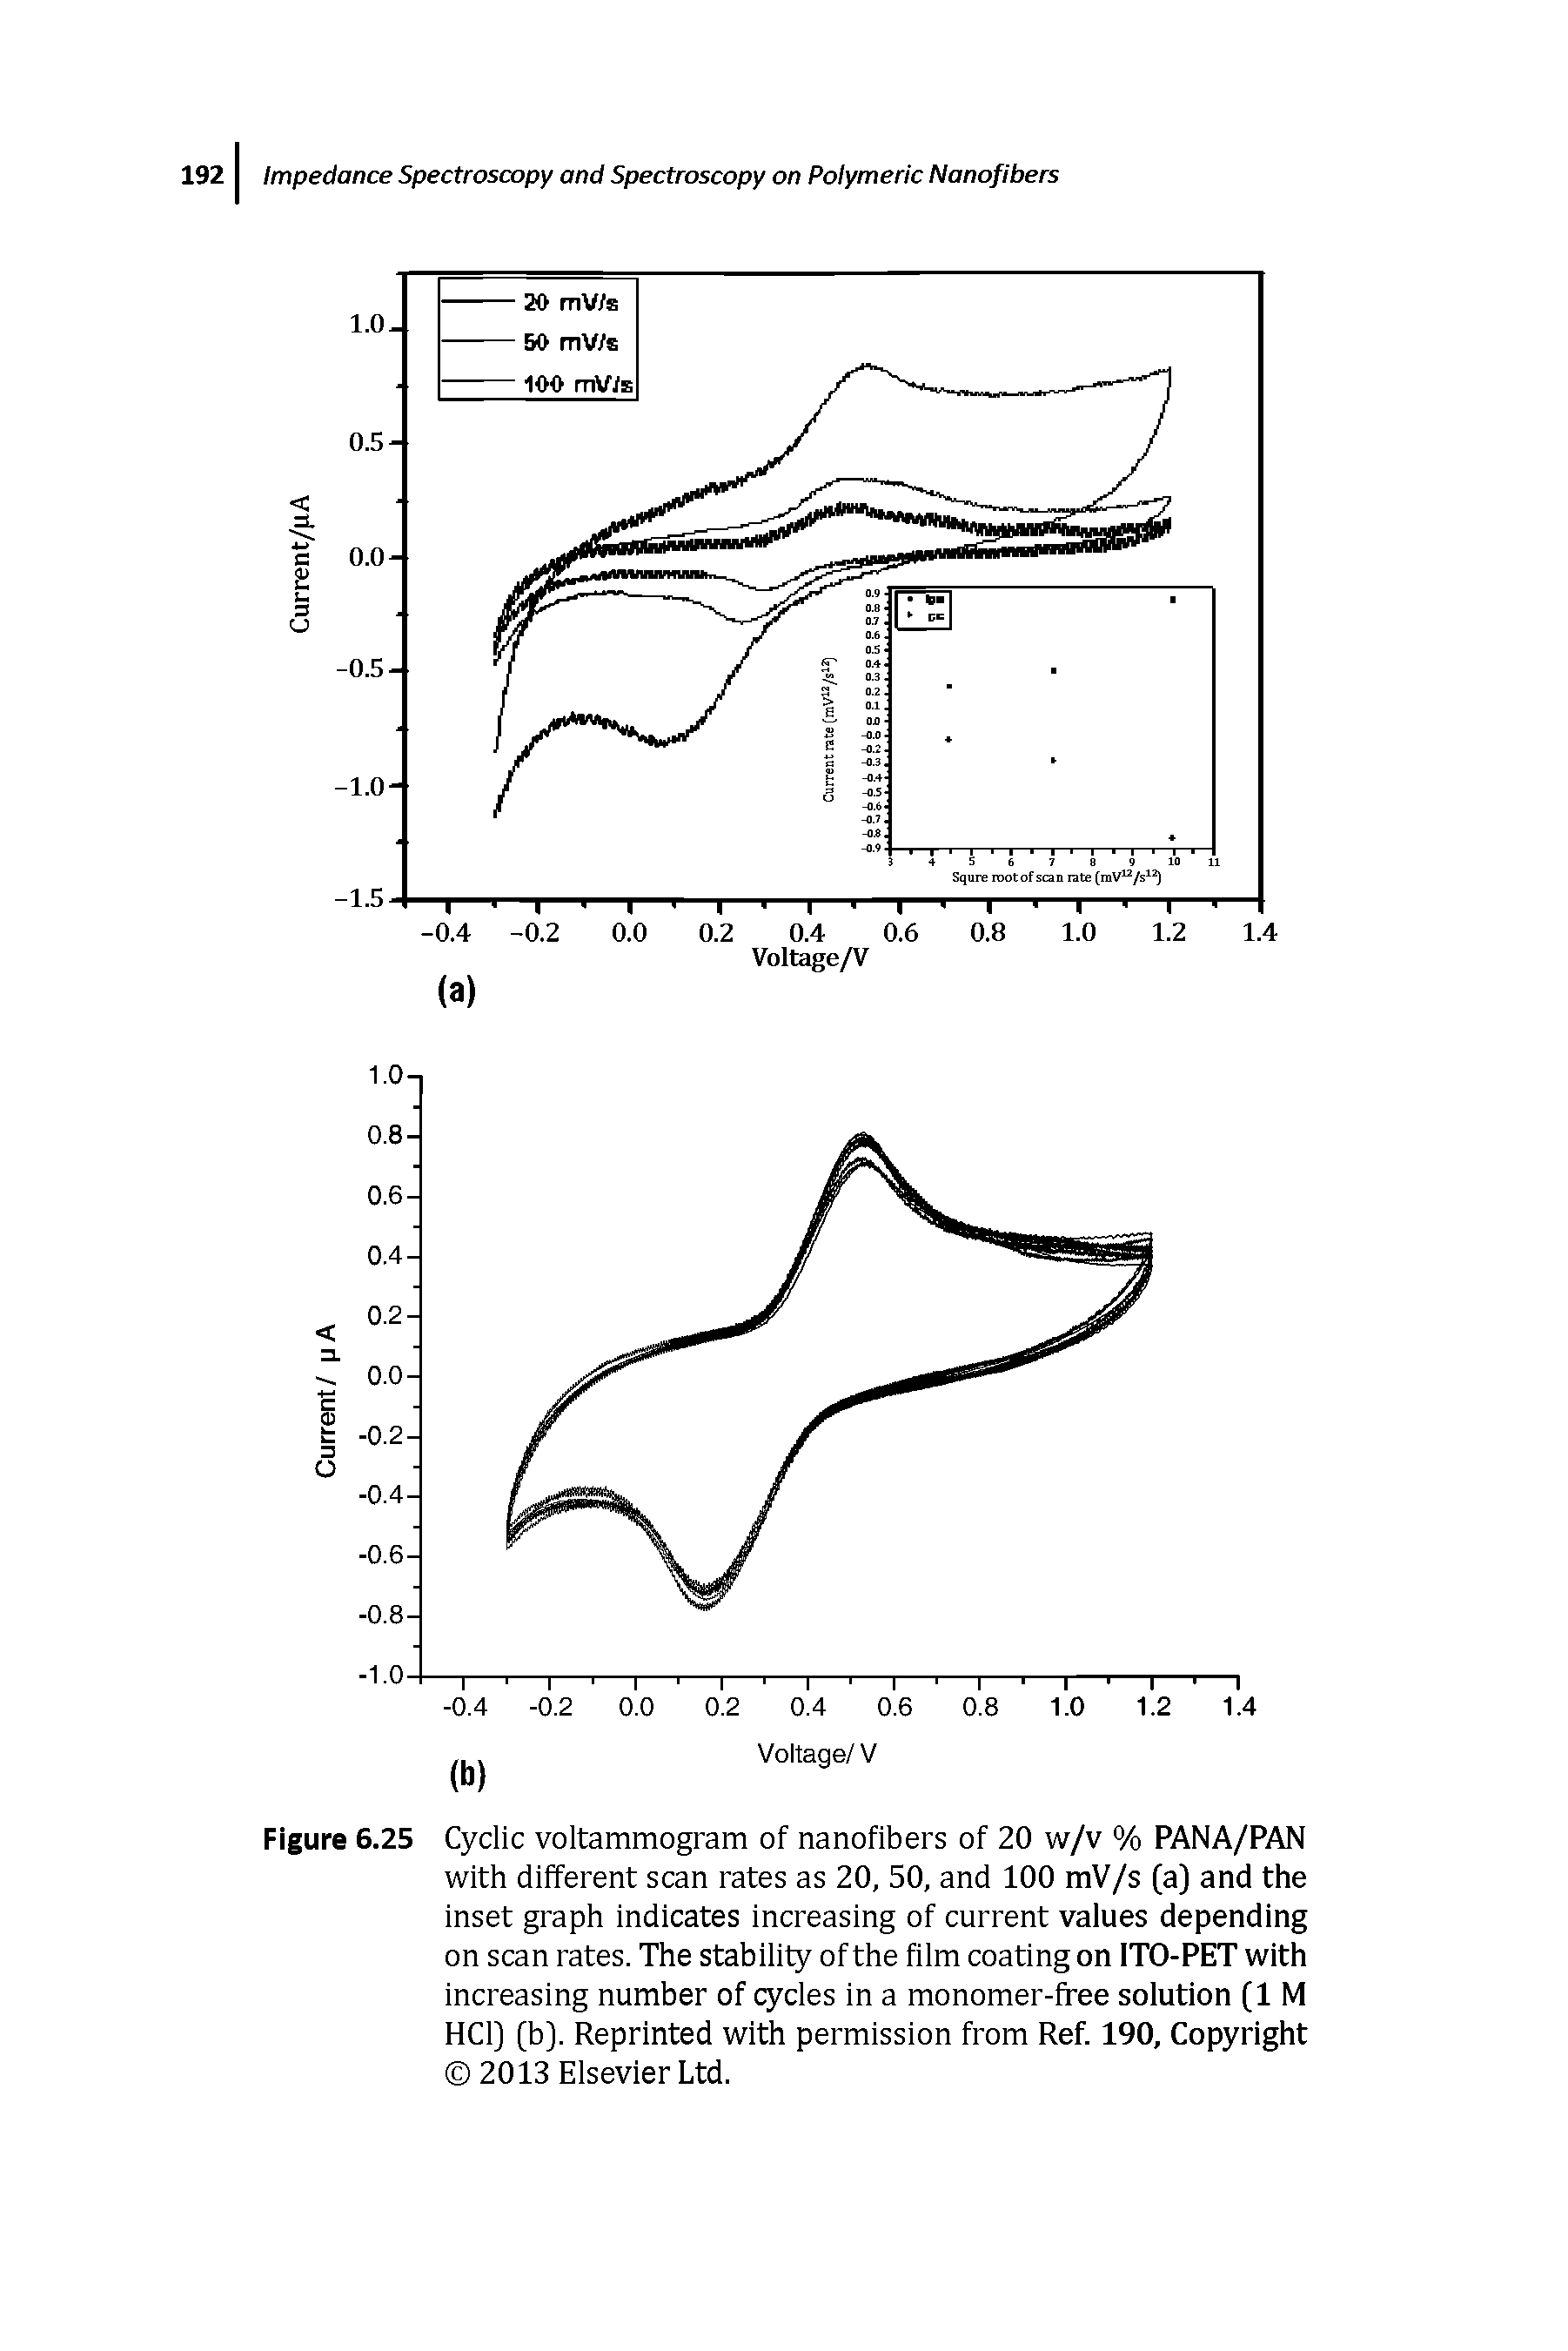 Figure 6.25 Cyclic voltammogram of nanofibers of 20 w/v % PANA/PAN with different scan rates as 20, 50, and 100 mV/s (a) and the inset graph indicates increasing of current values depending on scan rates. The stability of the film coating on ITO-PET with increasing number of cycles in a monomer-free solution (1 M HCl] (b]. Reprinted with permission from Ref. 190, Copyright 2013 Elsevier Ltd.